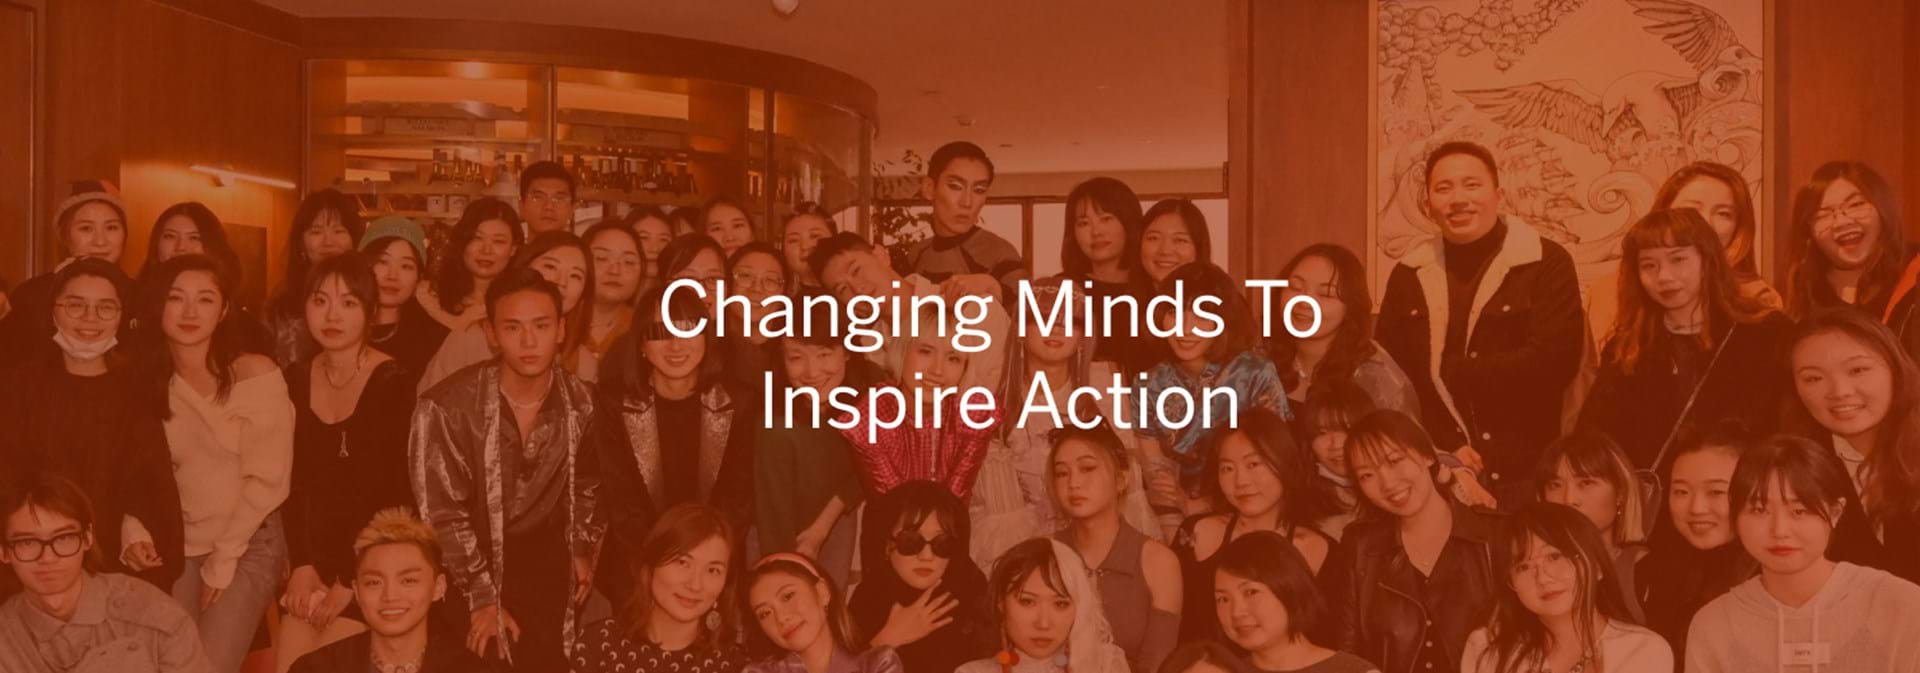 Changing Minds to Inspire Action